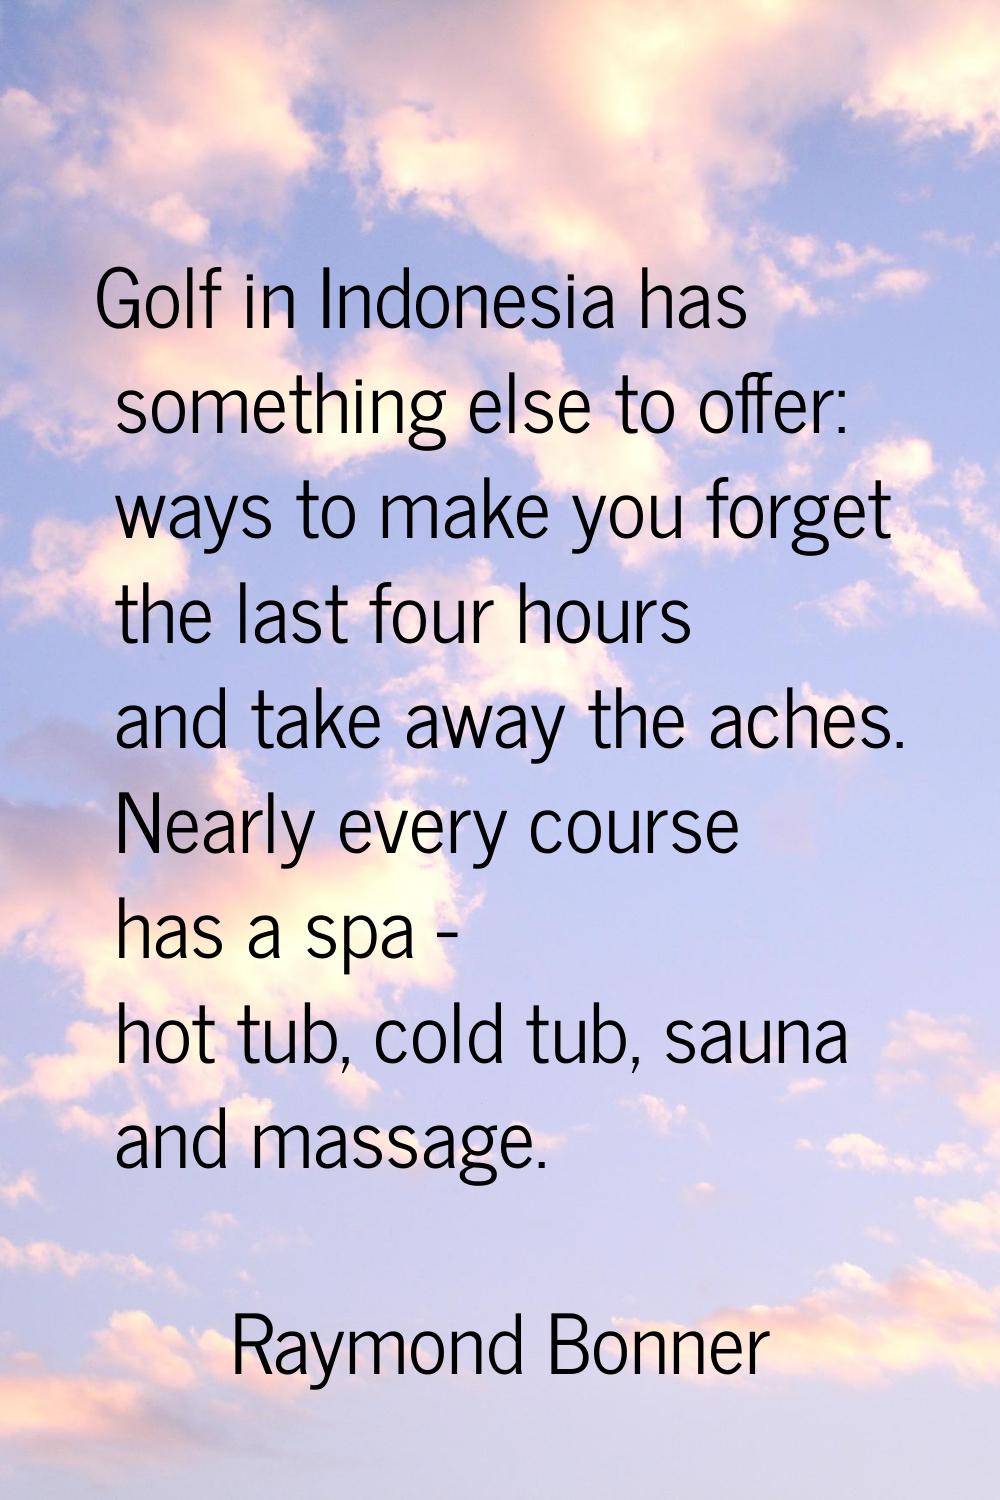 Golf in Indonesia has something else to offer: ways to make you forget the last four hours and take